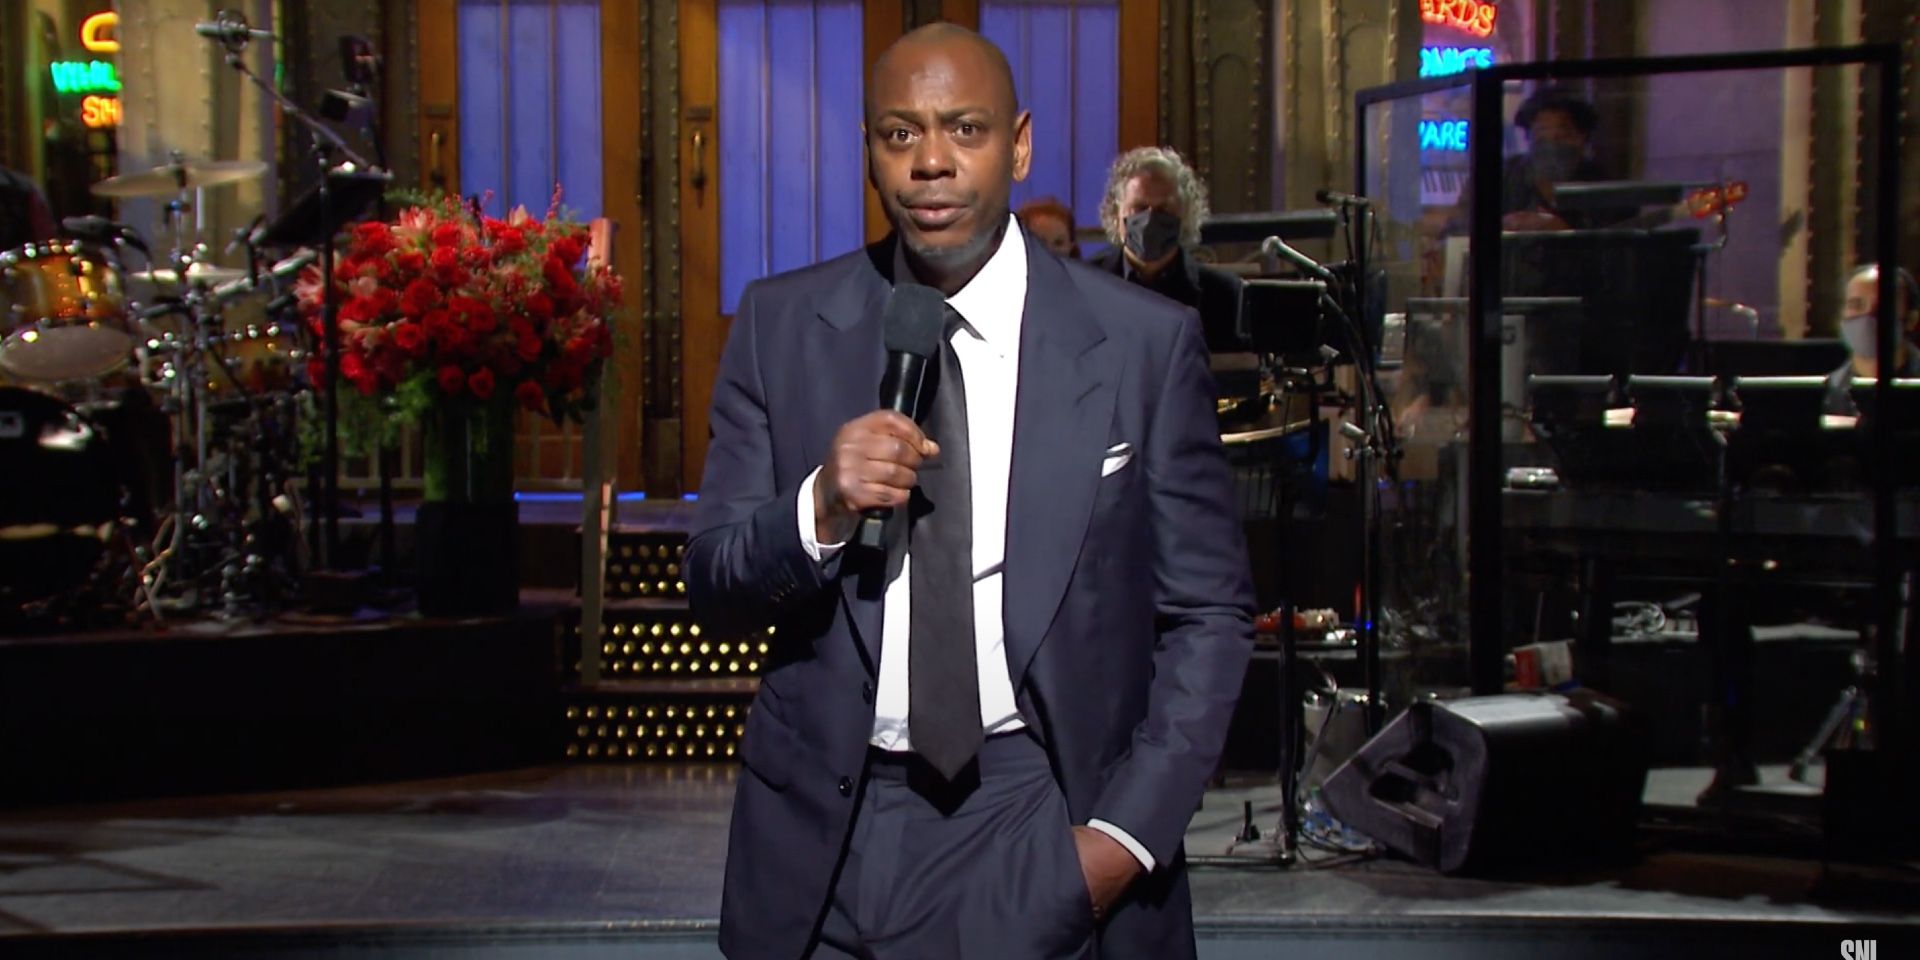 Dave Chappelle during his monologue in Saturday Night Live